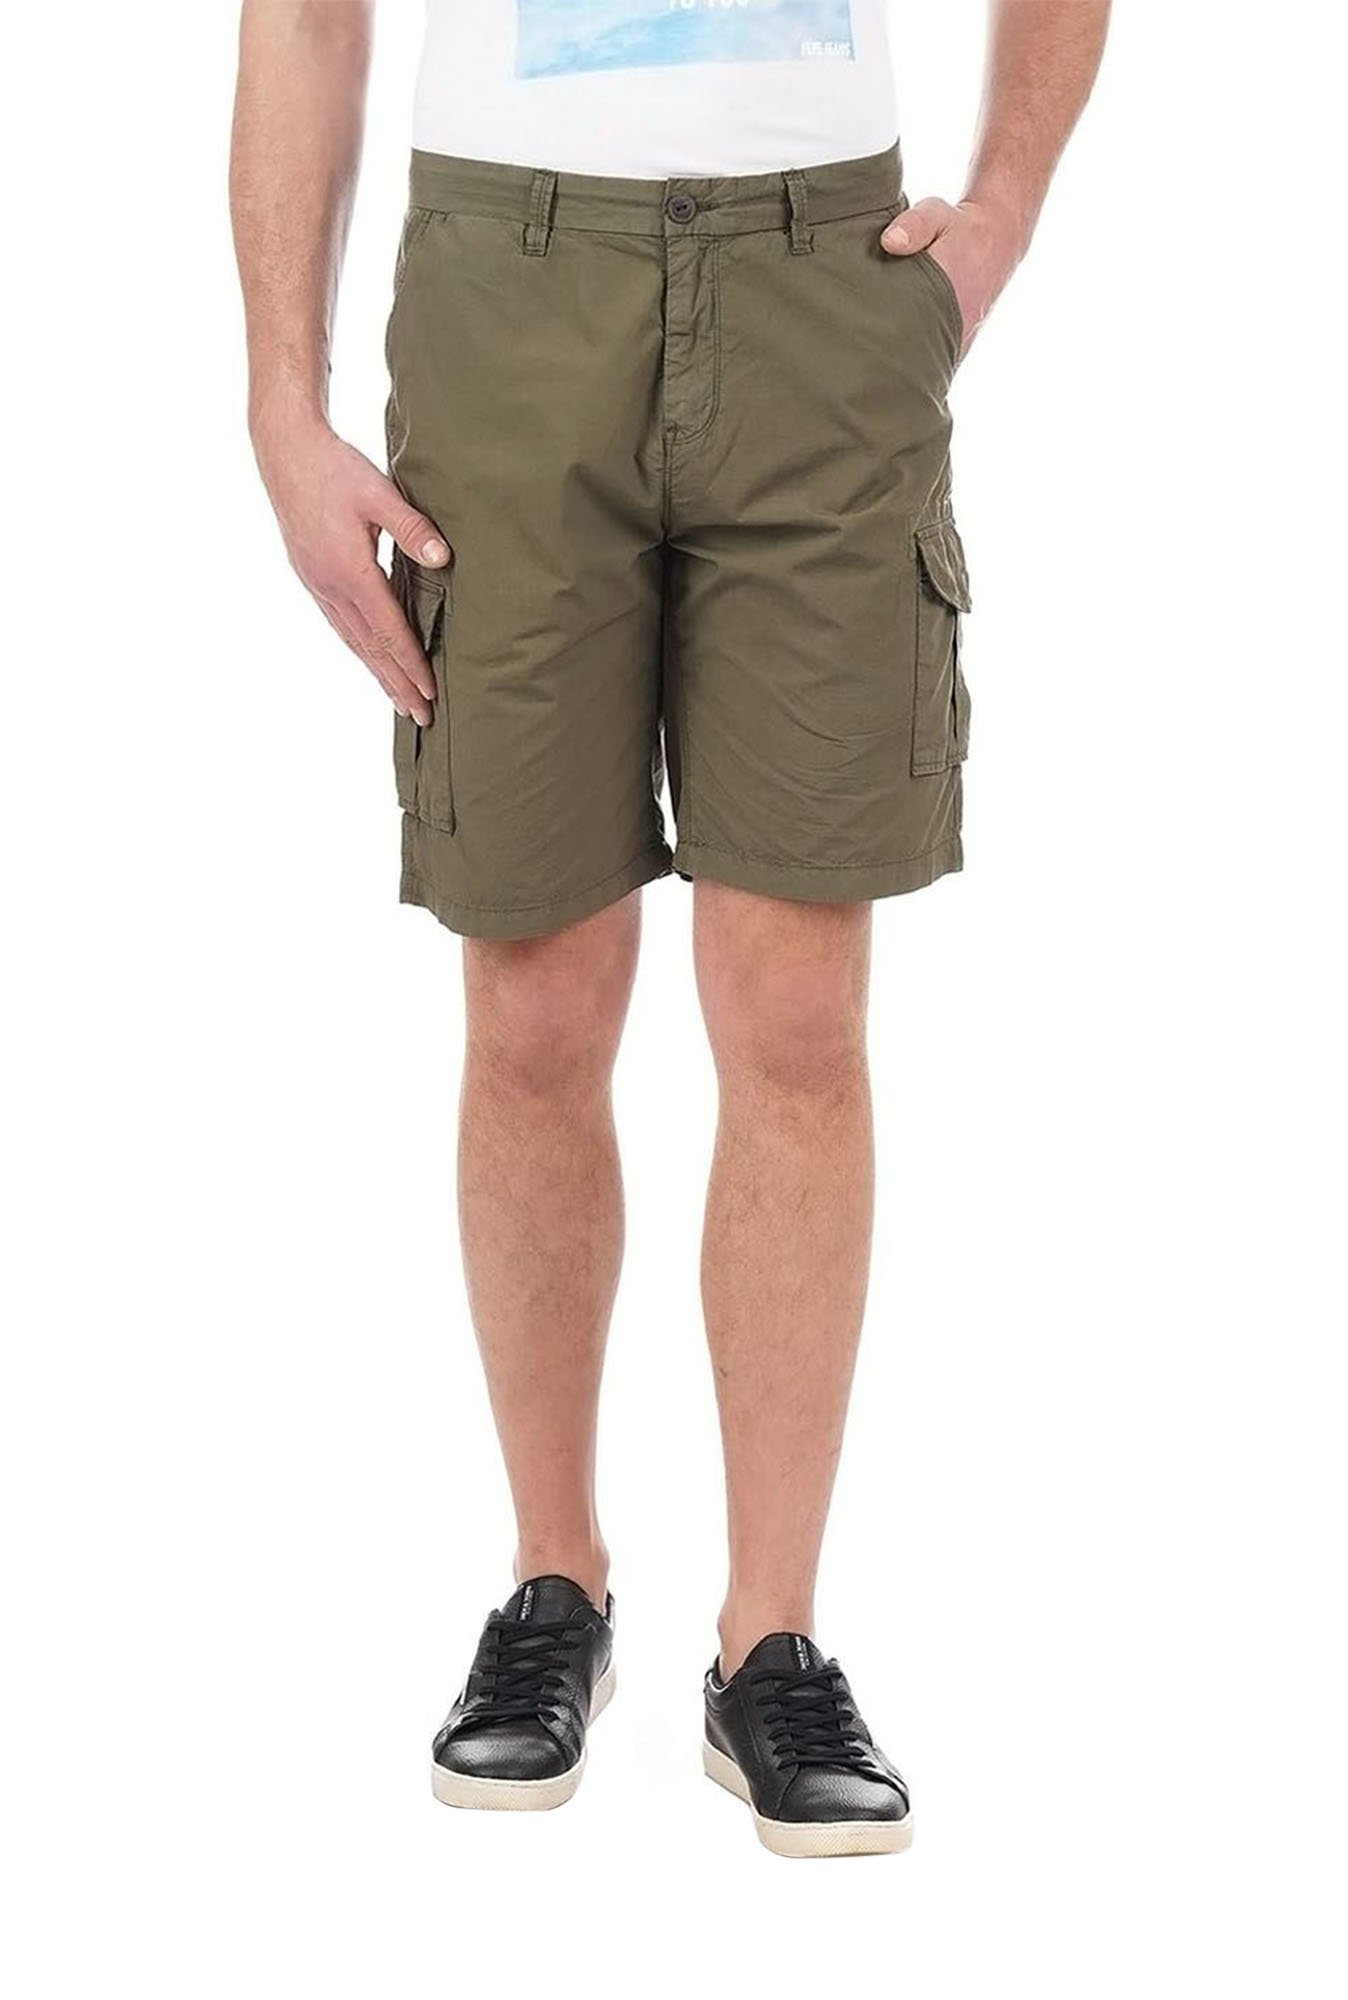 jeans cargo shorts